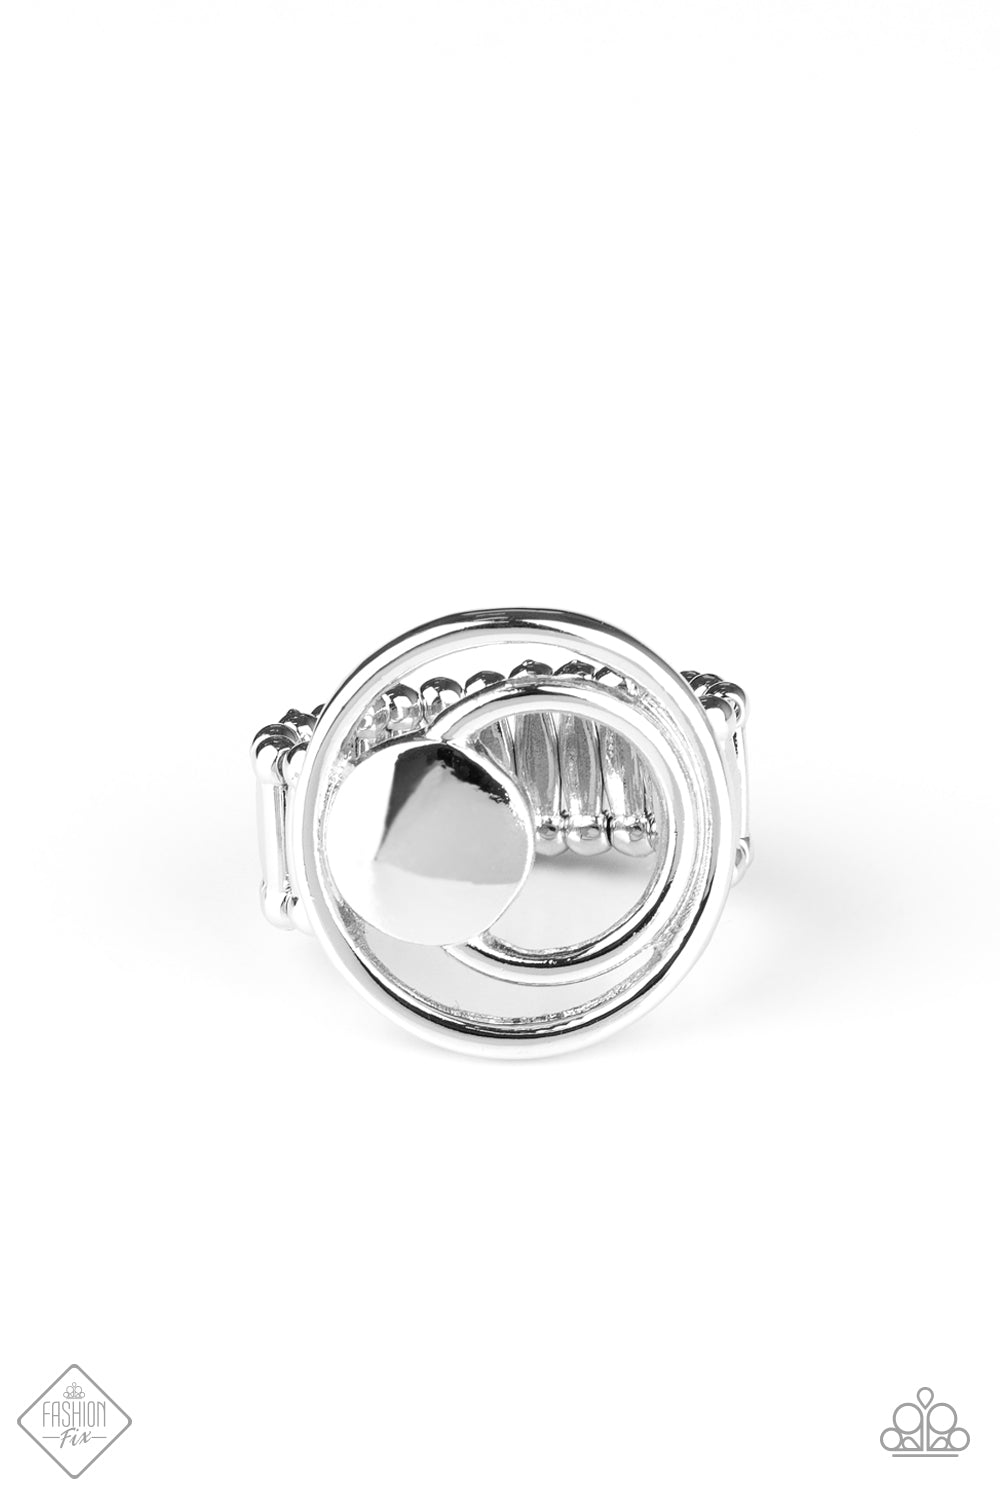 Edgy Eclipse Silver Ring